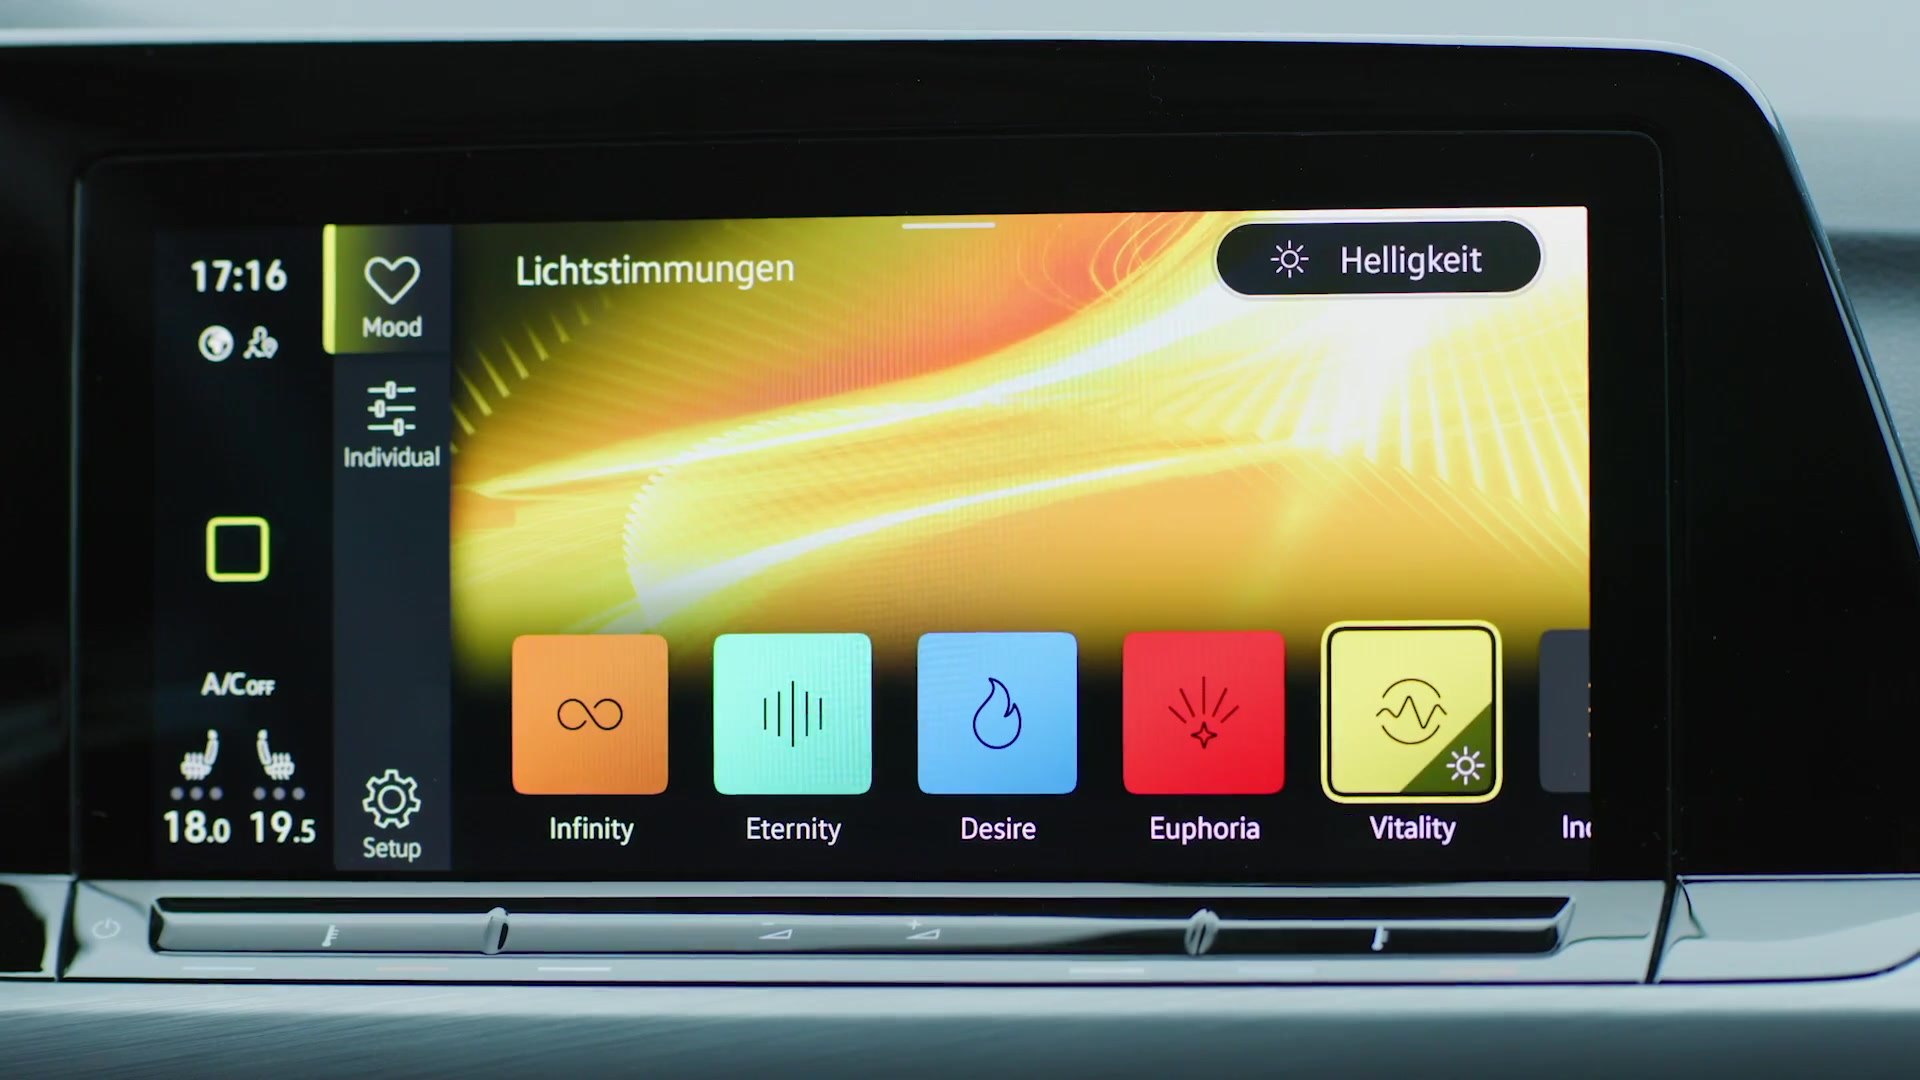 The new Volkswagen Golf 8 - Infotainment System - video Dailymotion